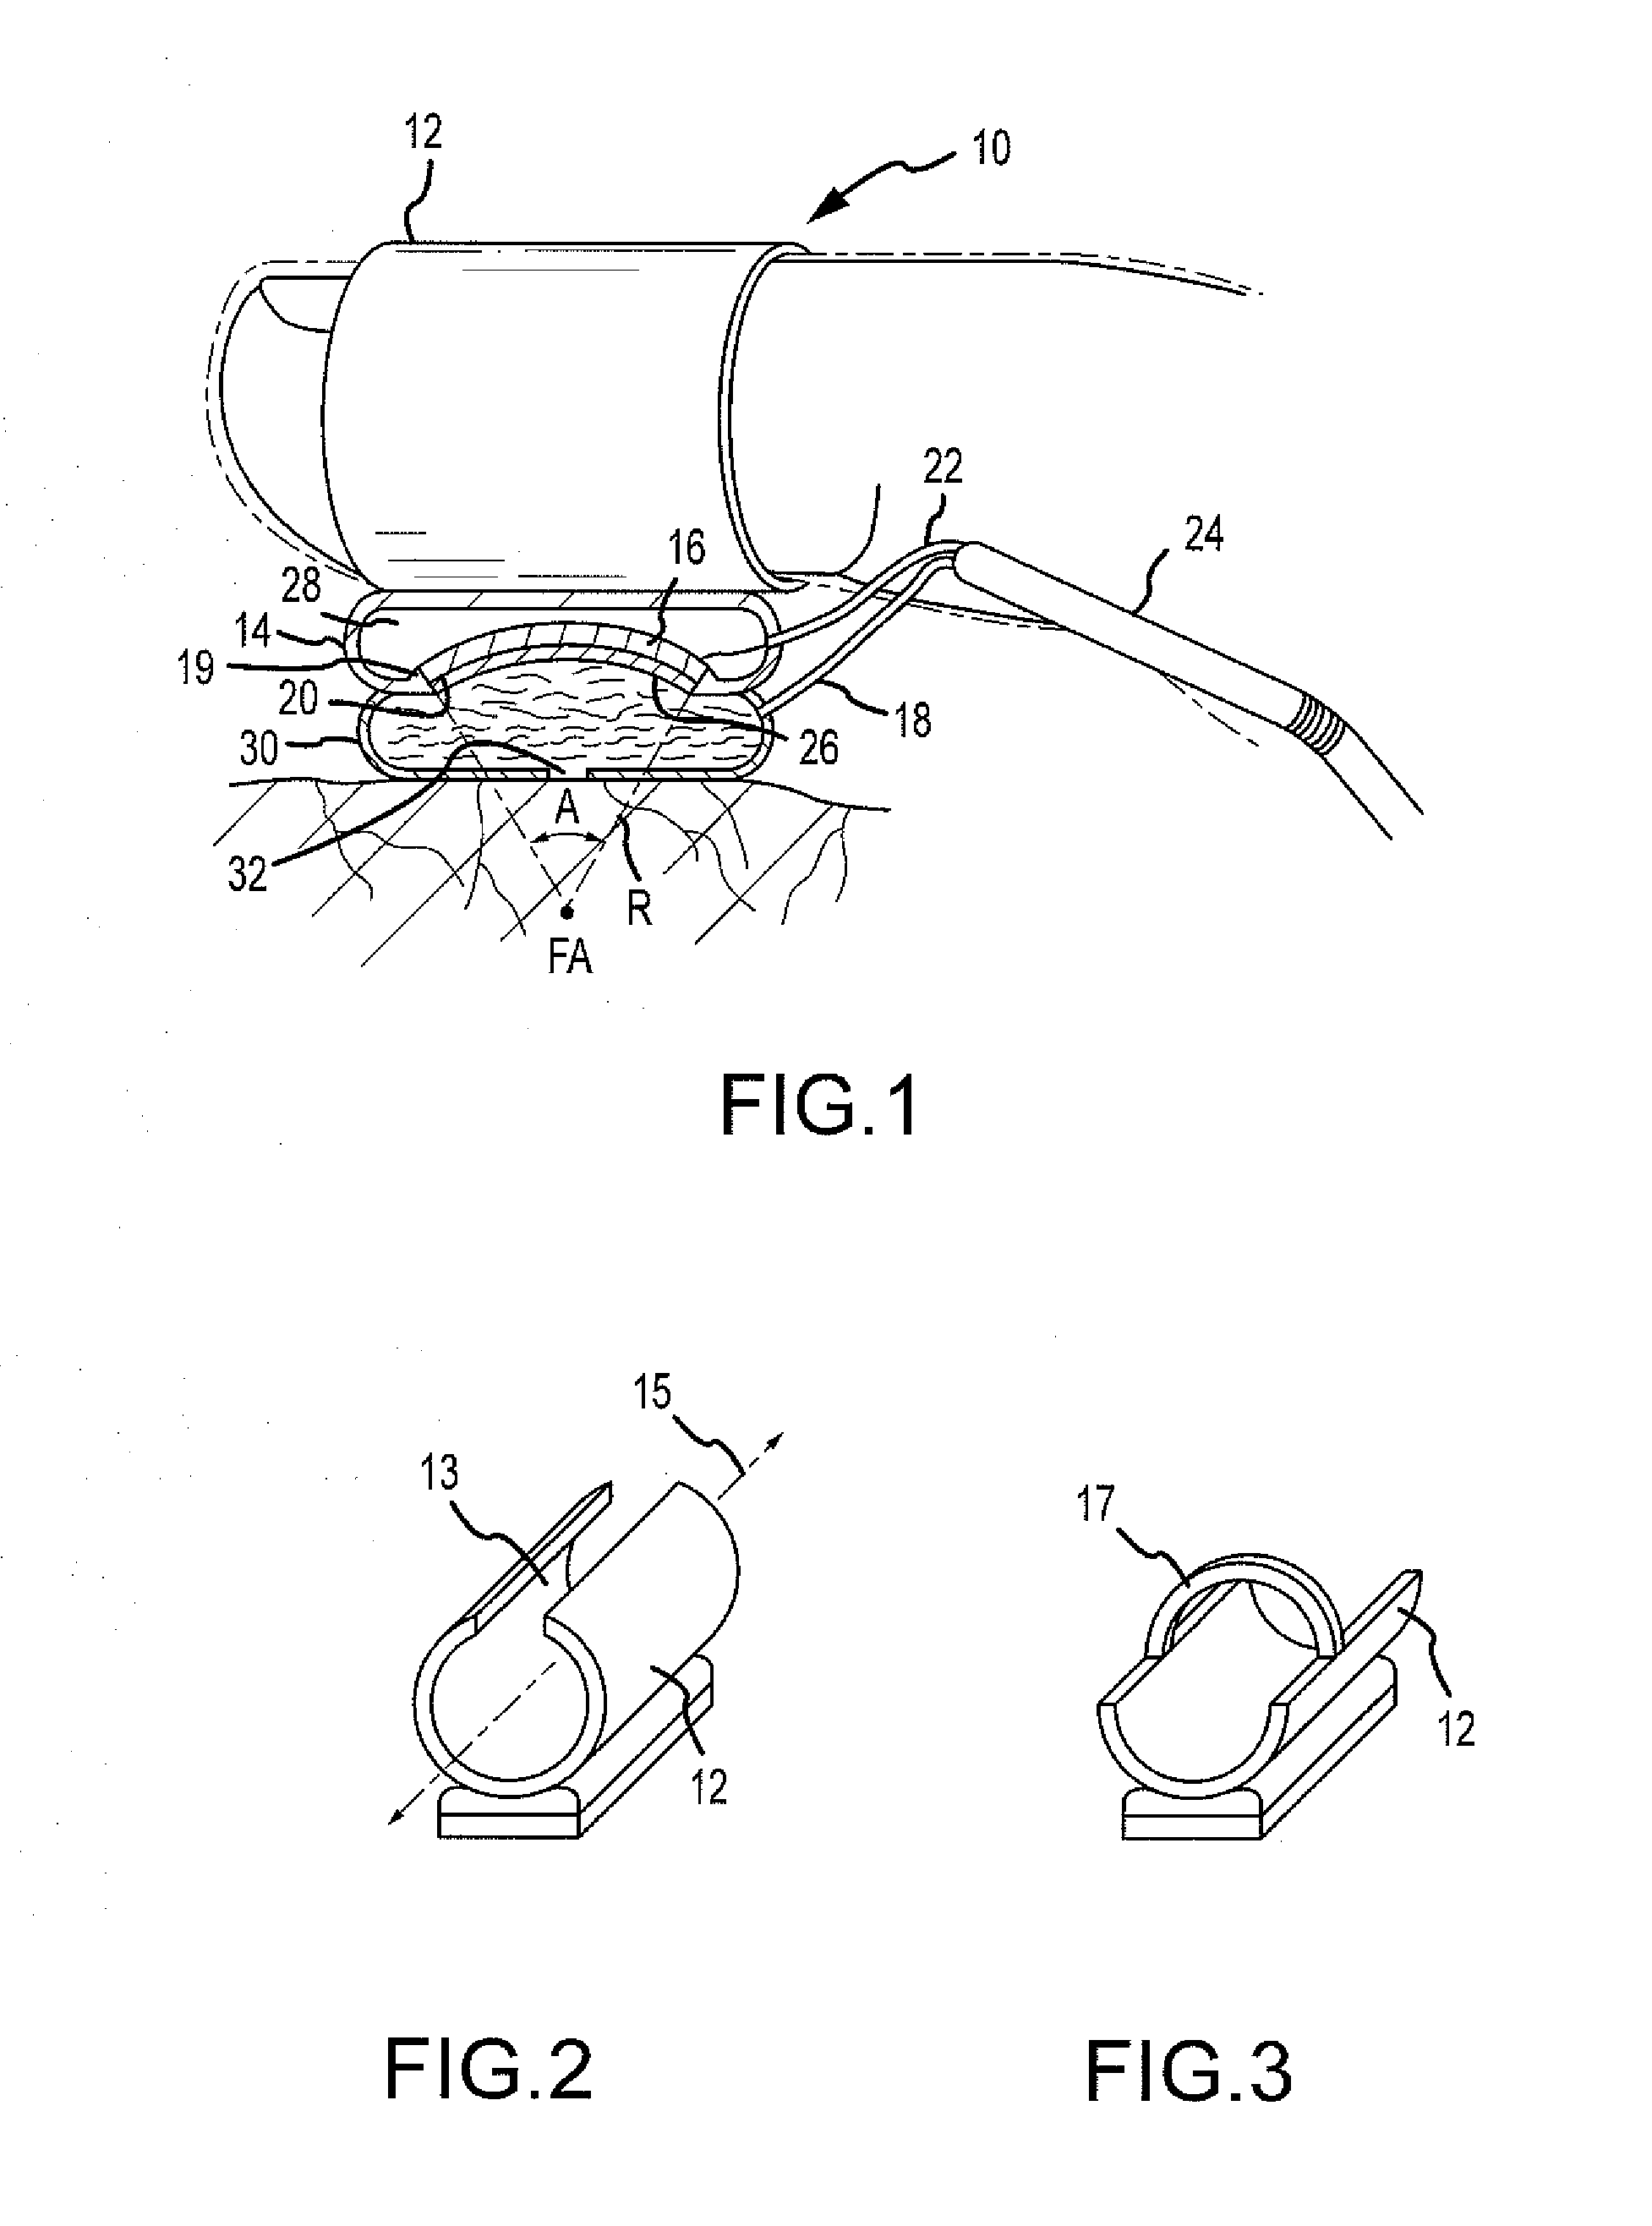 Finger-mounted or robot-mounted transducer device